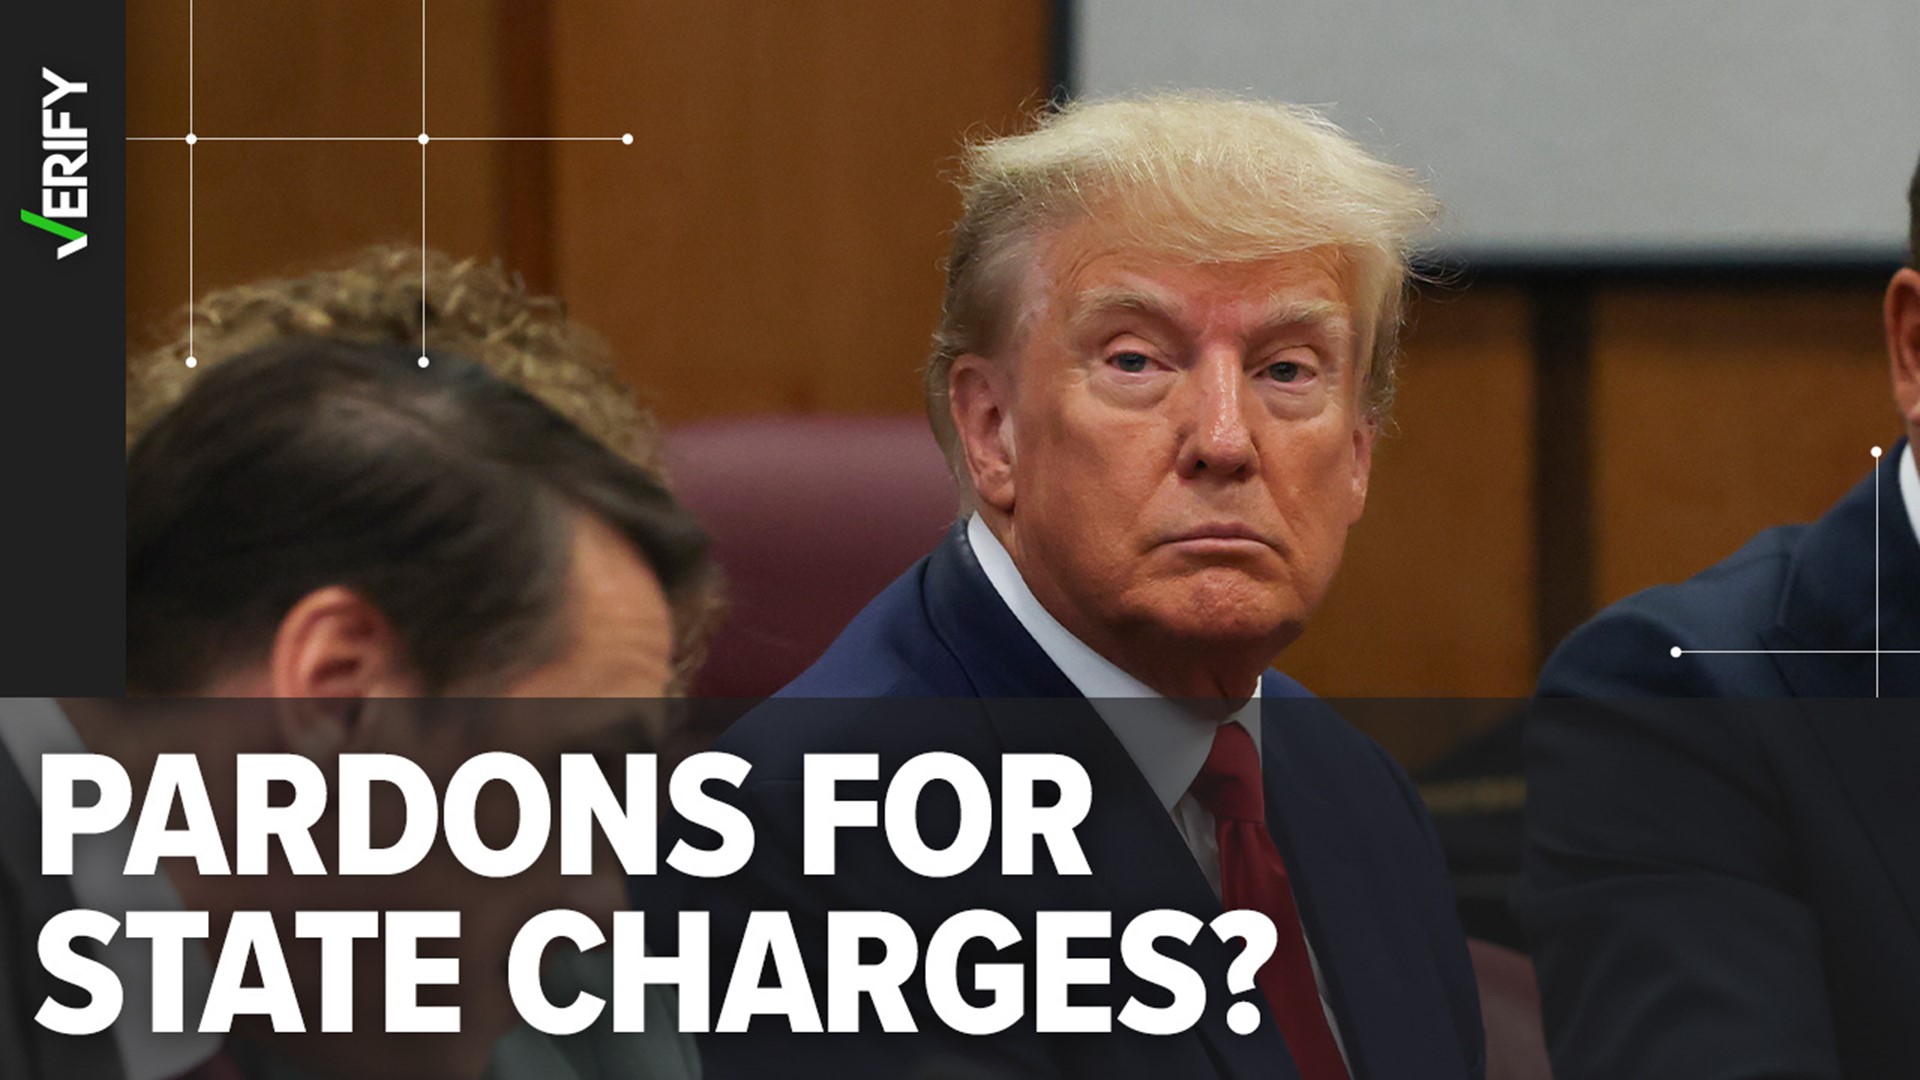 One of the top questions we’ve received from our readers is whether former President Trump could be pardoned if he is convicted. Here’s what we can VERIFY.